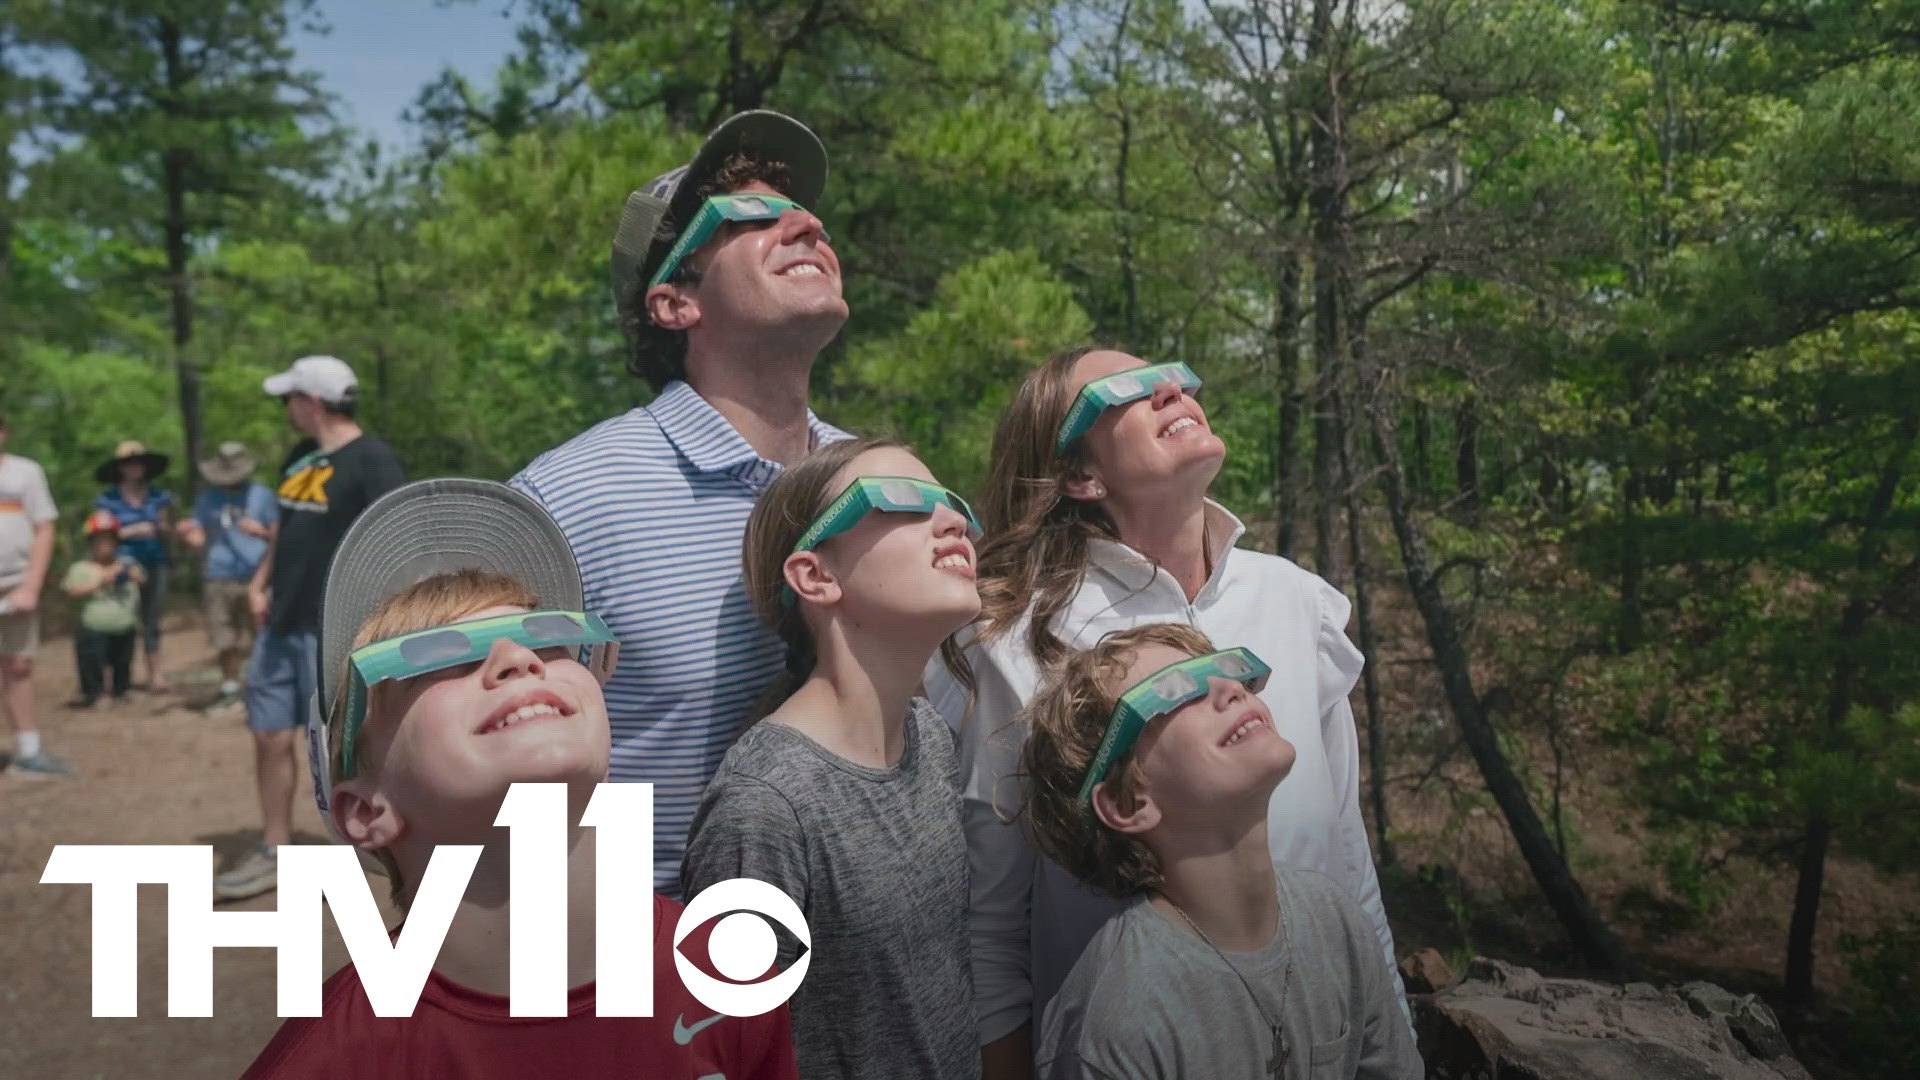 On Monday afternoon, Gov. Sanders and her family hiked up Pinnacle Mountain to view the total solar eclipse.